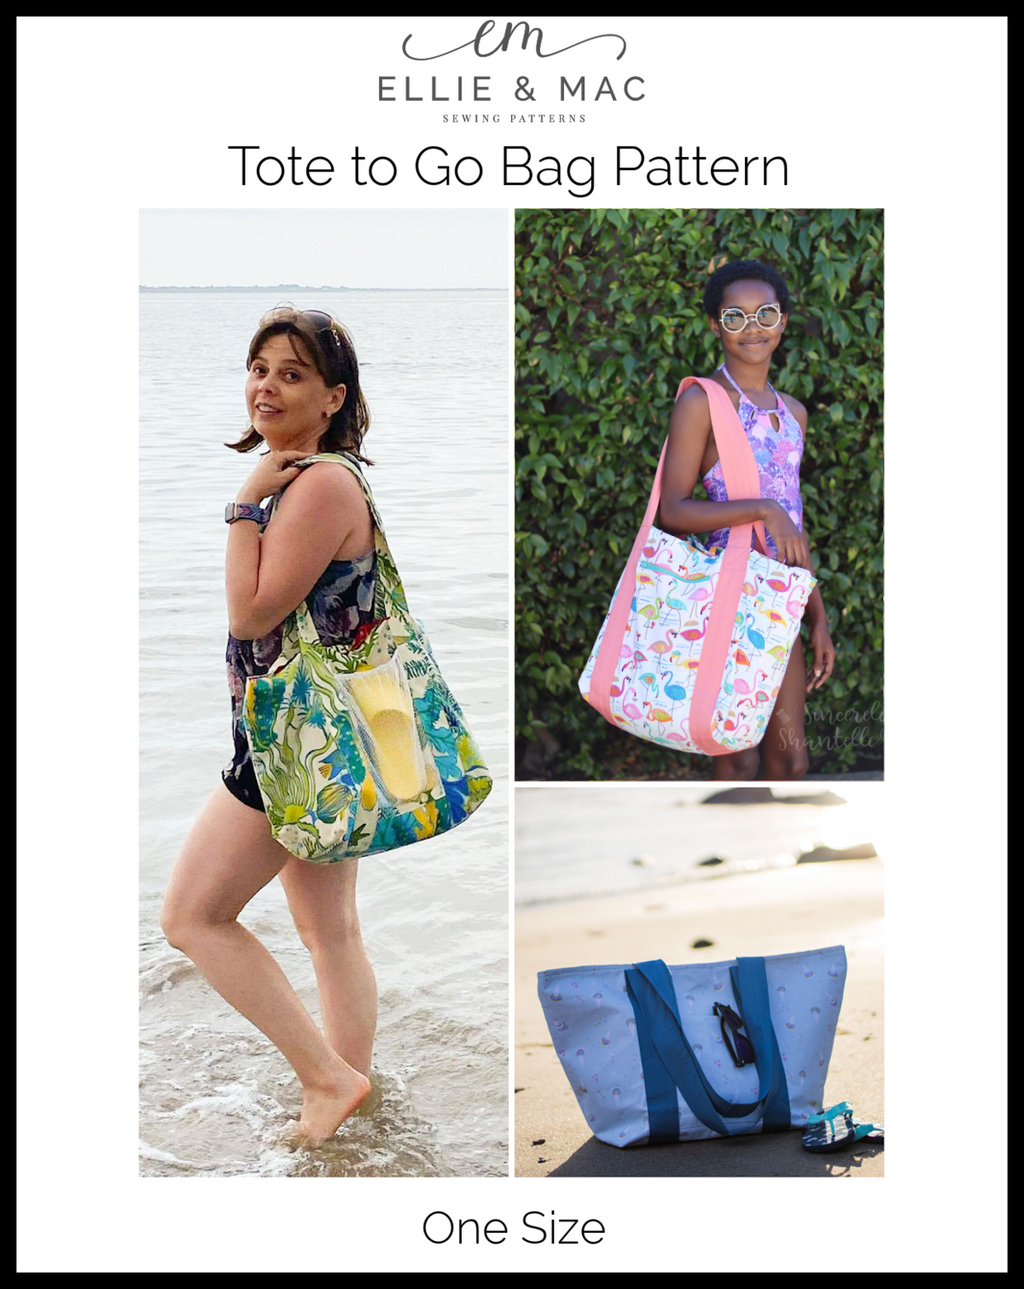 On The Go - Bag, Patterns